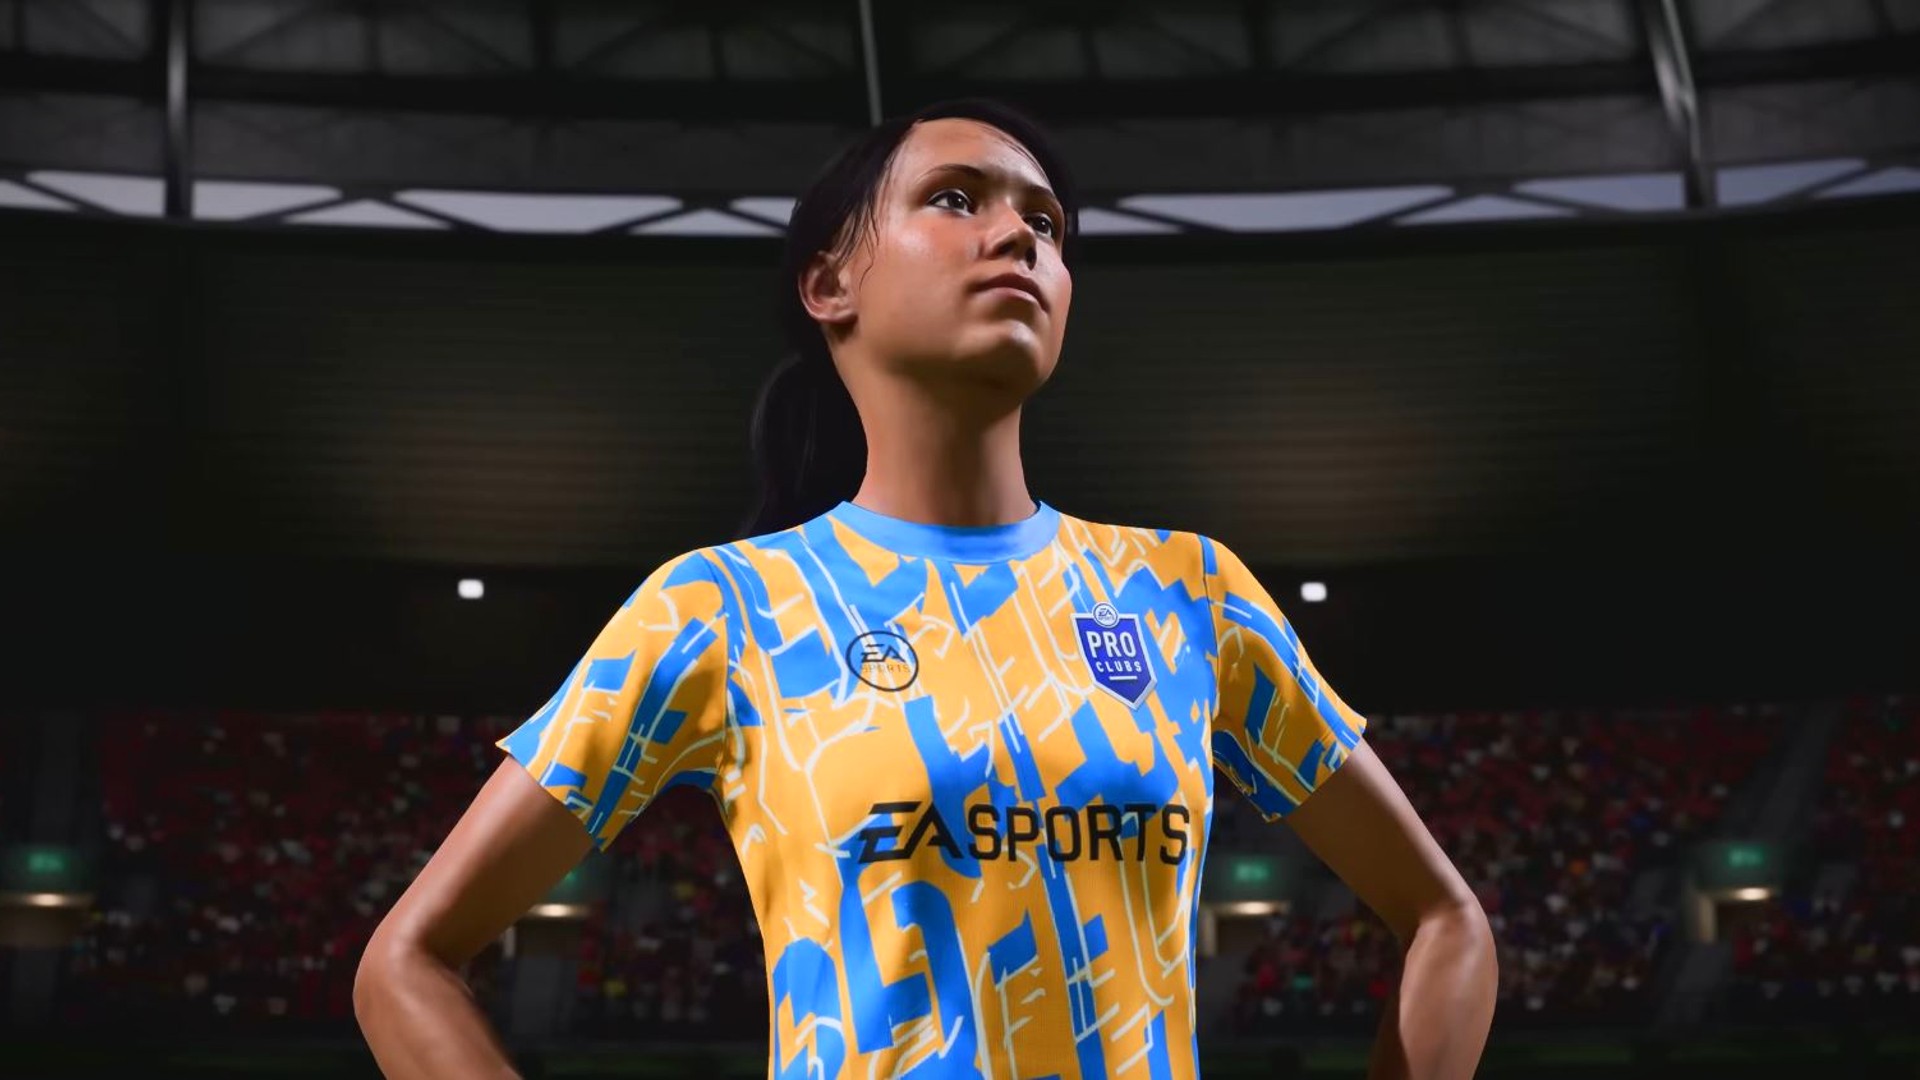 FIFA 23 Pro Clubs perks, archetypes, and crossplay